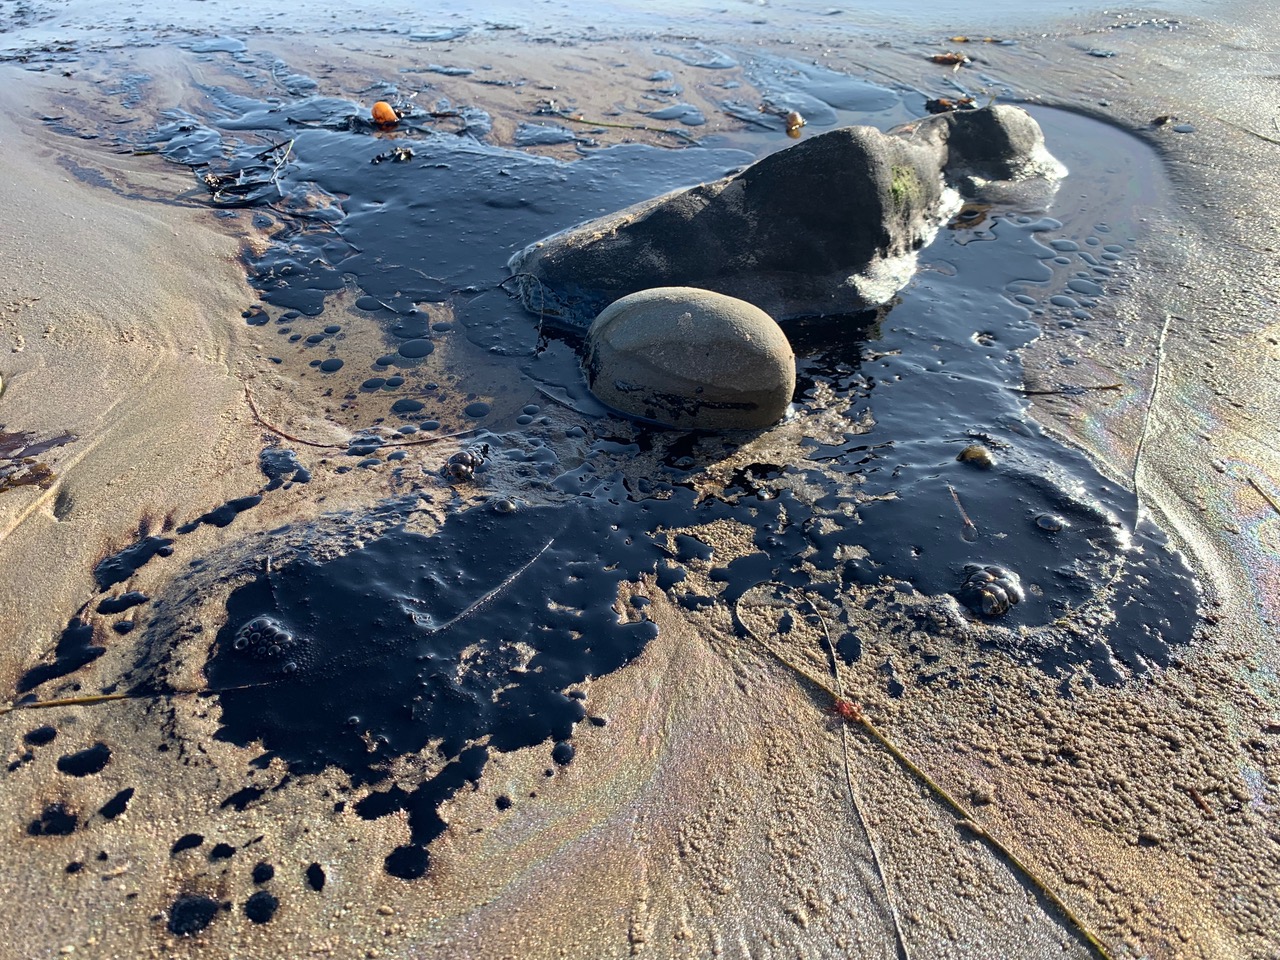 While the oil platforms may be coming out, the bubbler’s aren’t in the Carpinteria area, notably near the Seal refuge. It can be a natural seep or more likely from old oil operations. State Lands is trying to figure it out. (Photo by Jim Taylor)